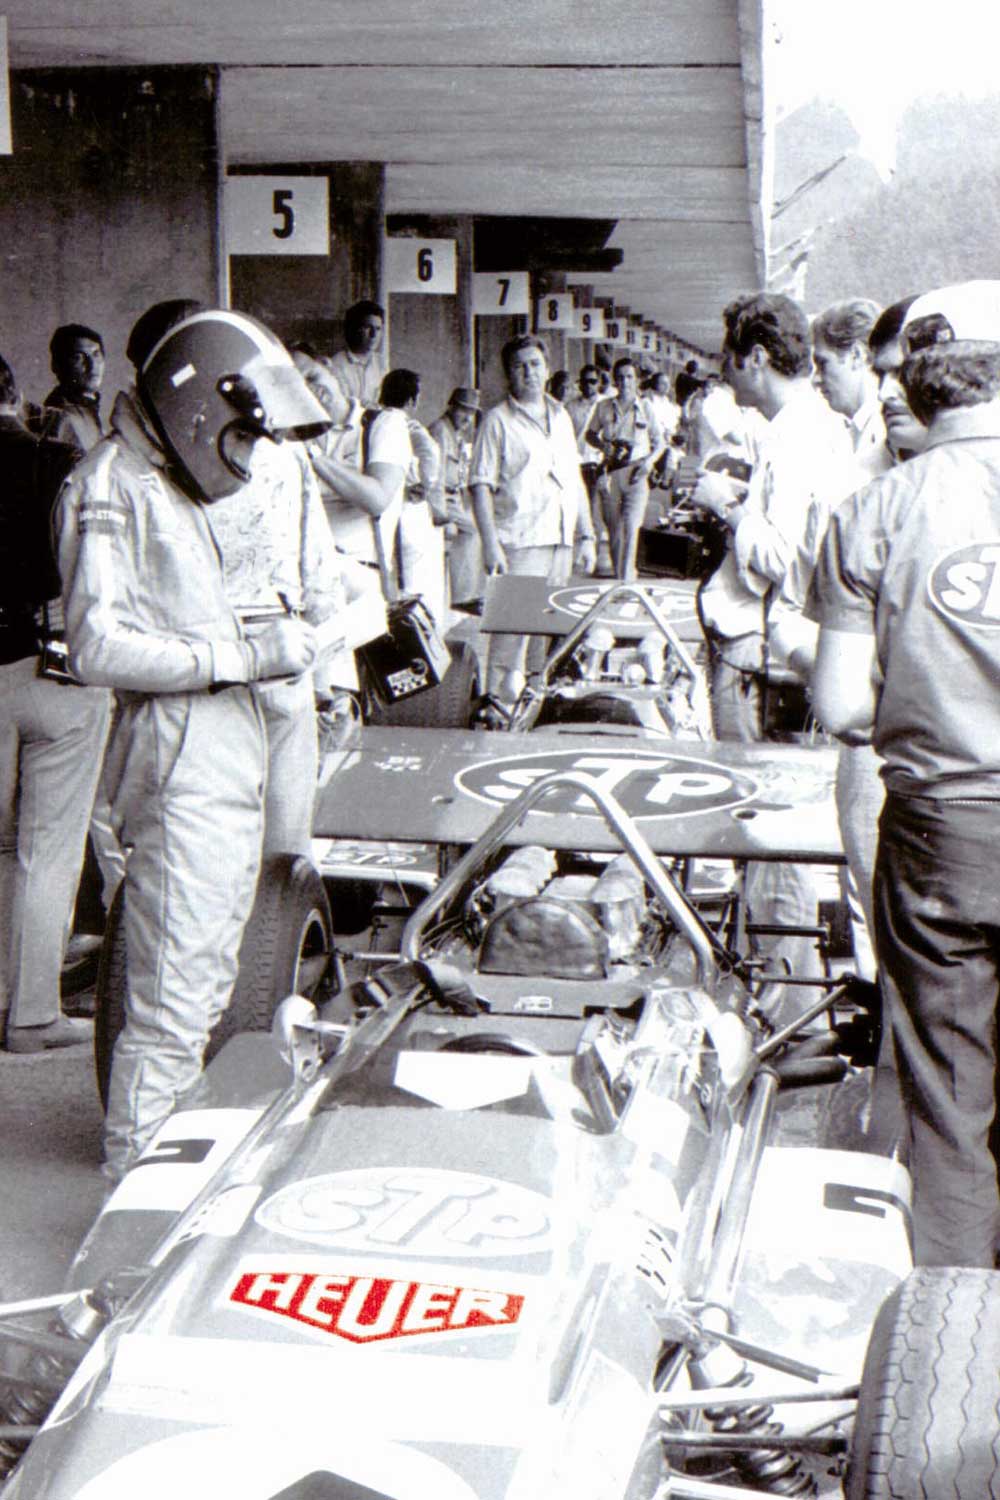 Jo Siffert getting ready for a race, with Heuer logos on his suit and car